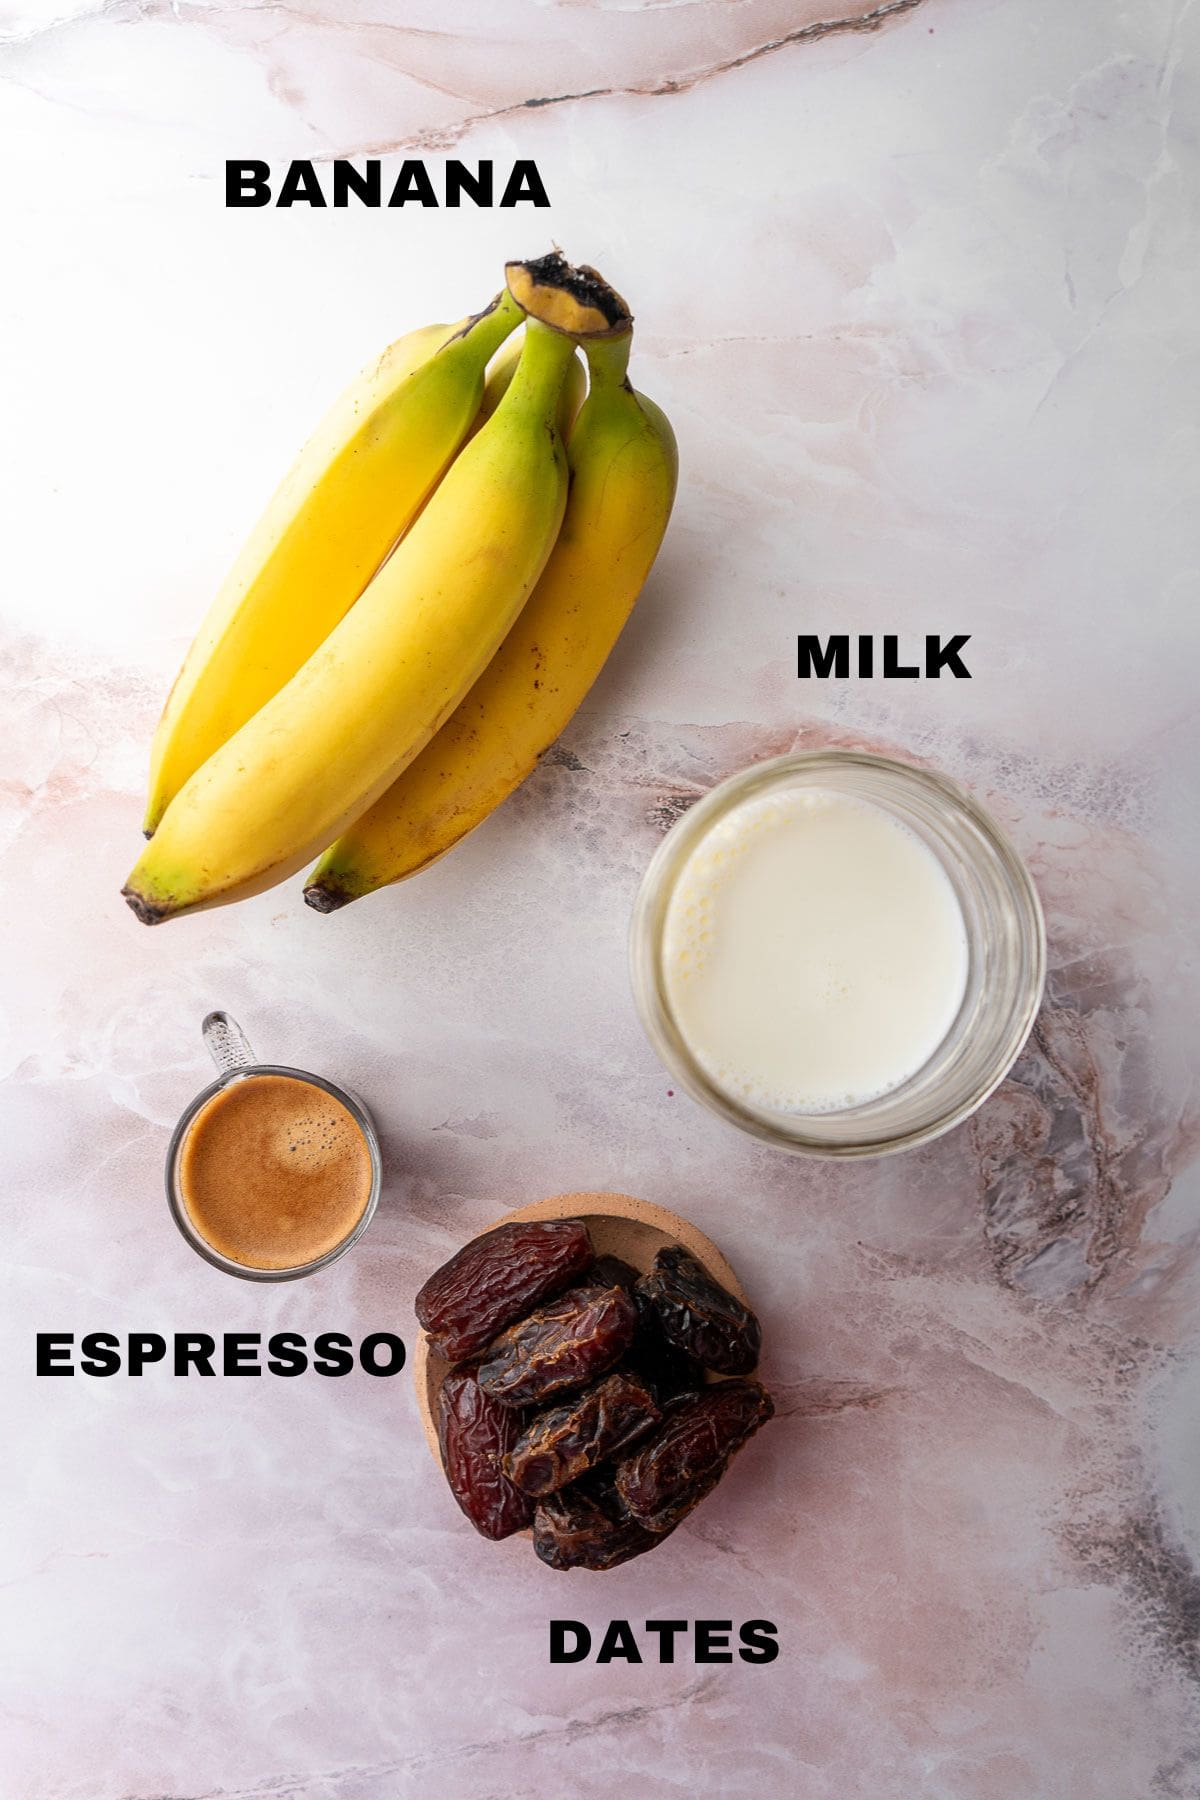 Banana, milk, dates, and espresso ingredients with labels.